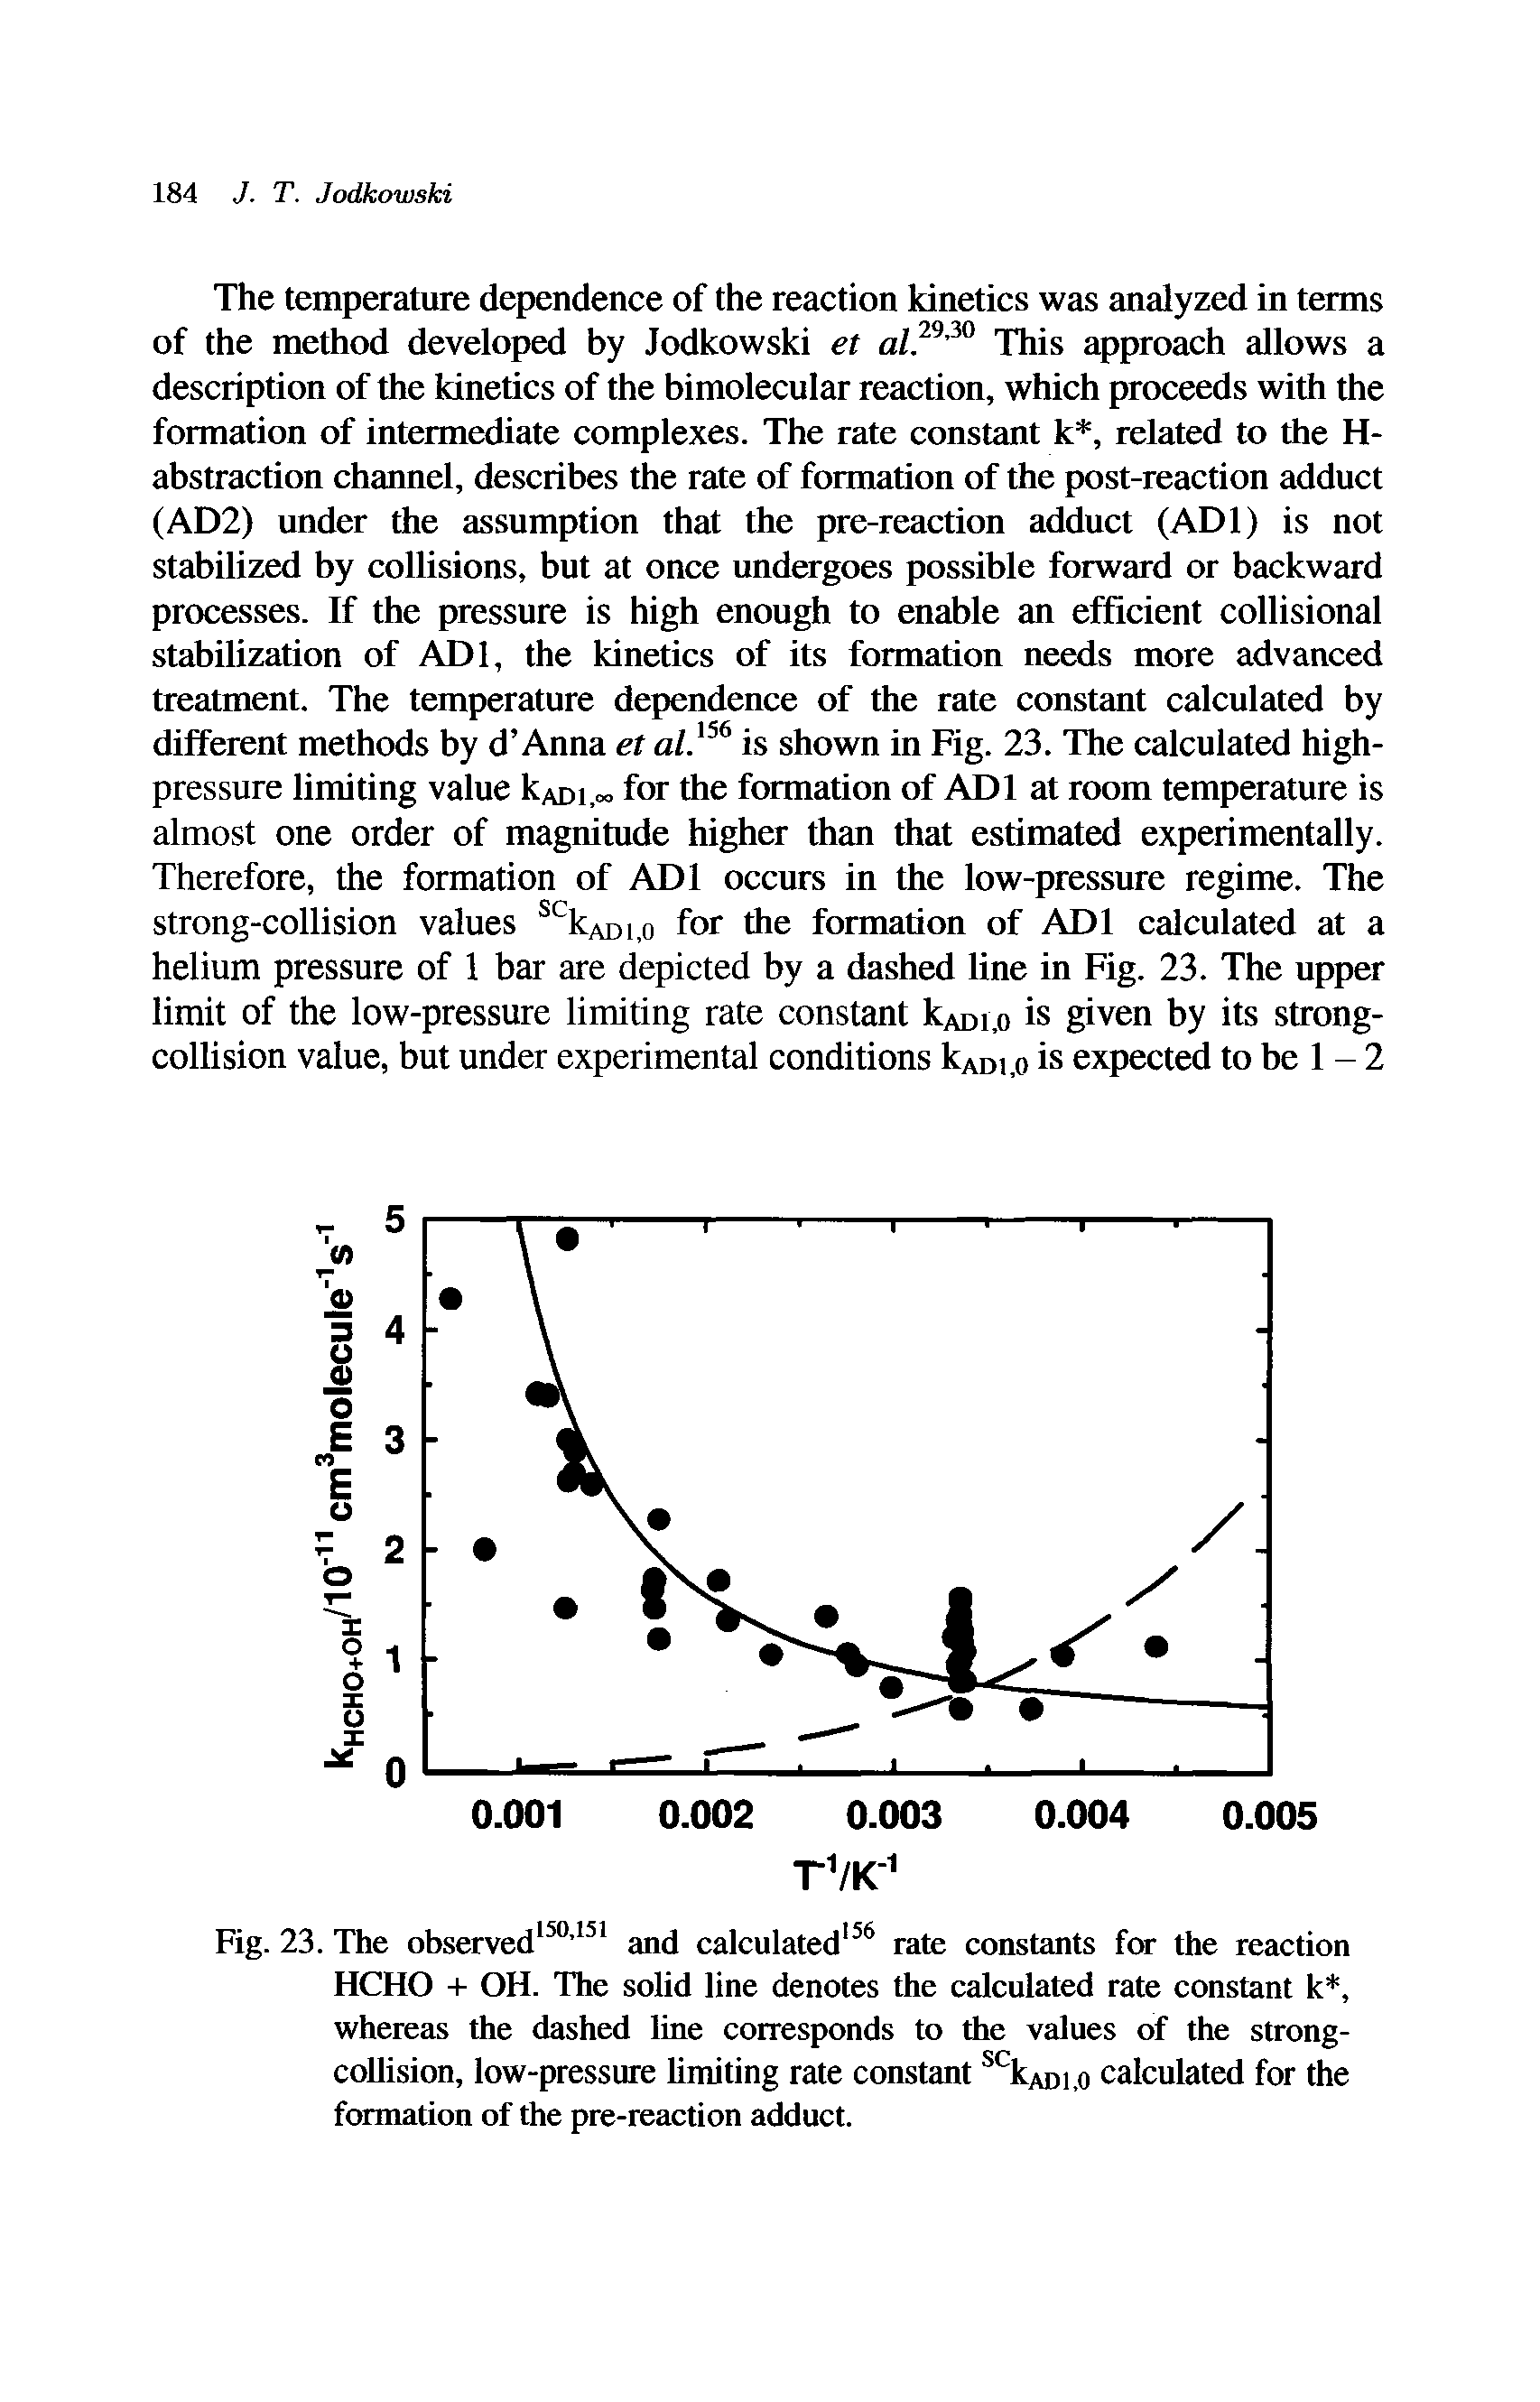 Fig. 23. The observed150,151 and calculated156 rate constants for the reaction HCHO + OH. The solid line denotes the calculated rate constant k, whereas the dashed line corresponds to the values of the strong-collision, low-pressure limiting rate constant sckADi,o calculated for the formation of the pre-reaction adduct.